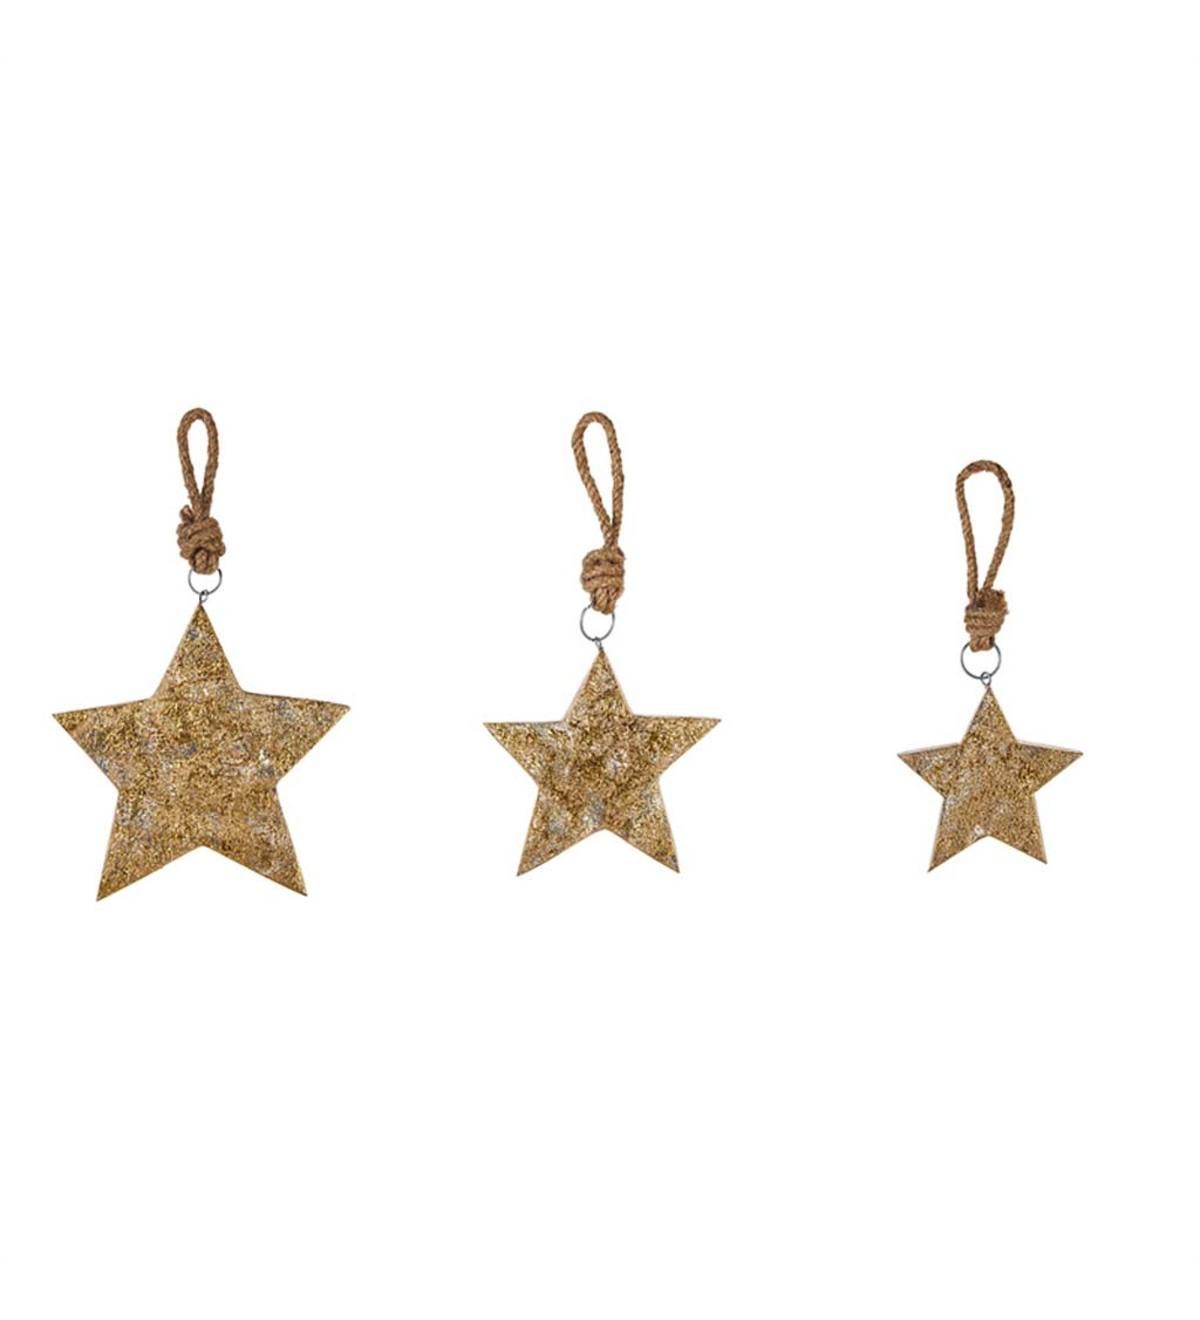 Gold and Silver Wooden Star Ornaments, Set of 3